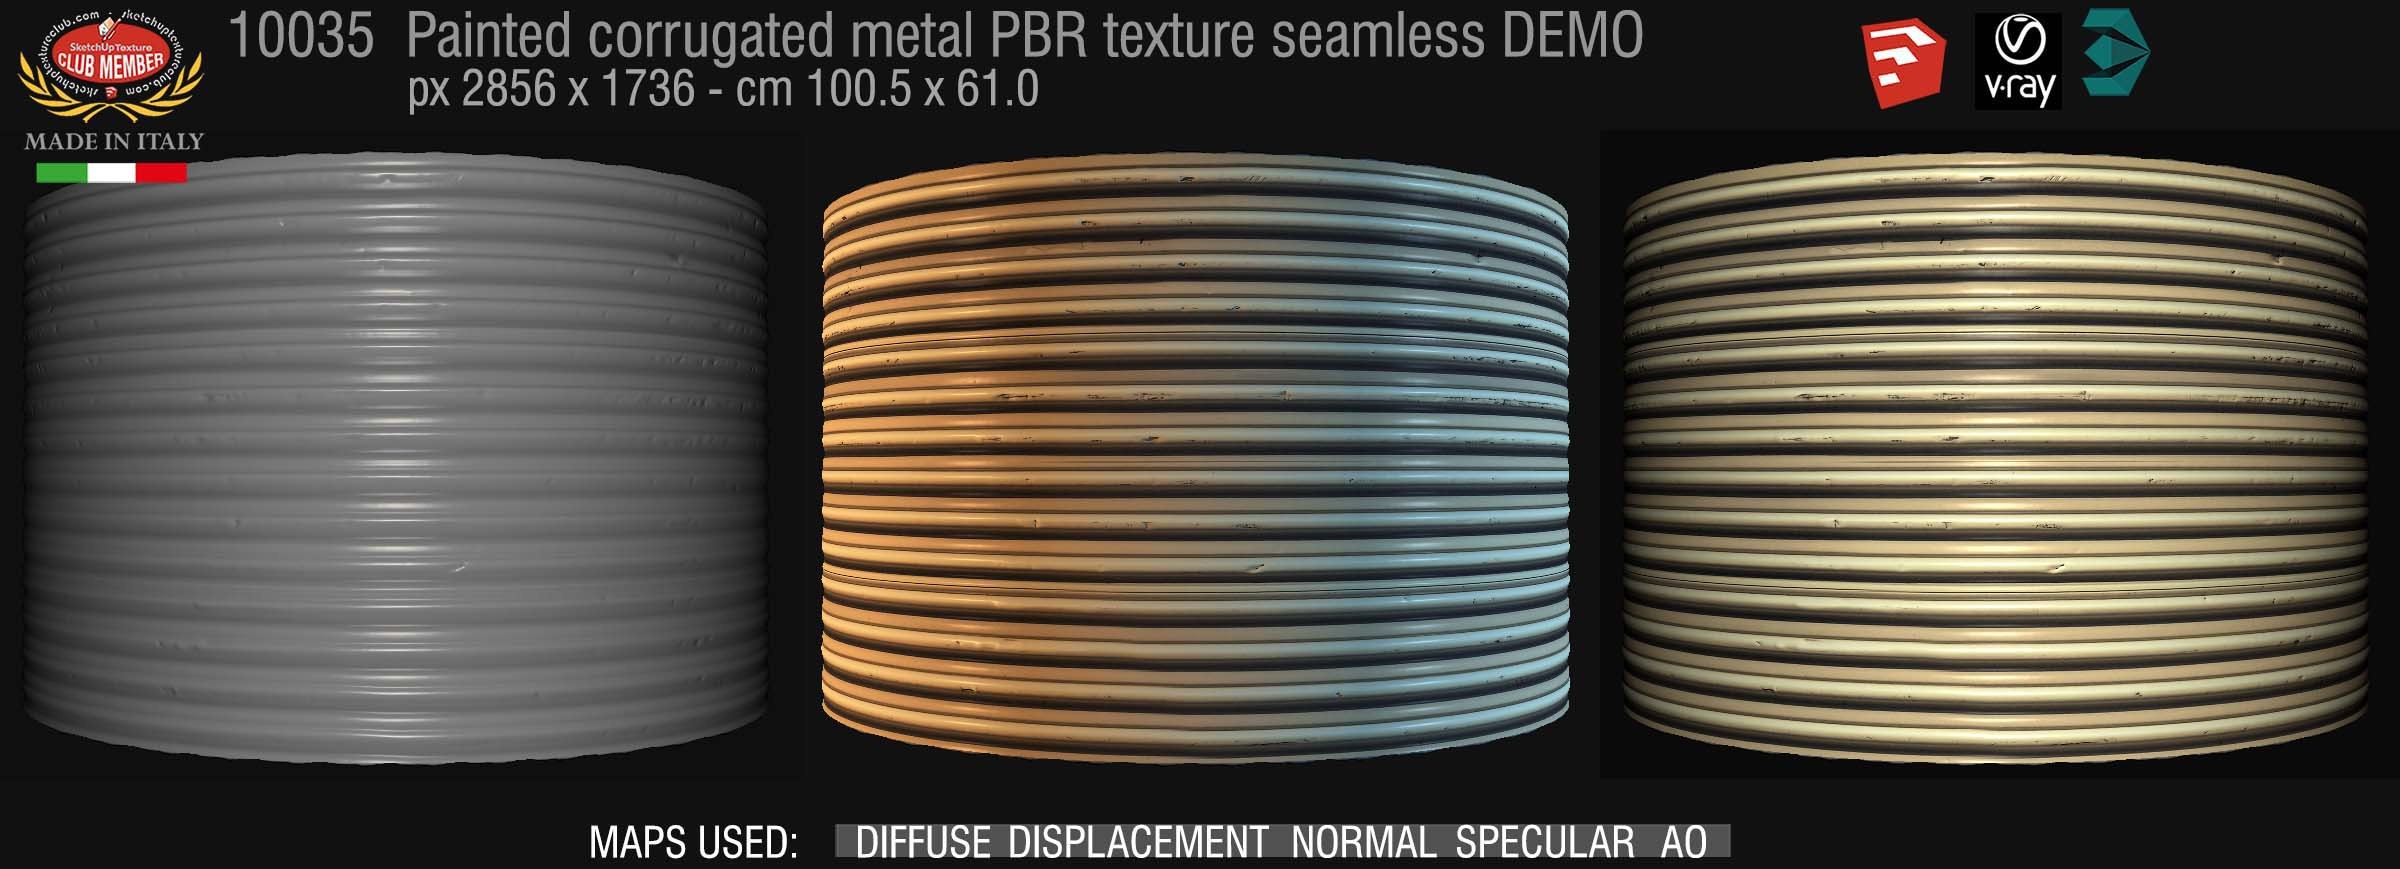 10035 Painted corrugated metal PBR texture seamless DEMO